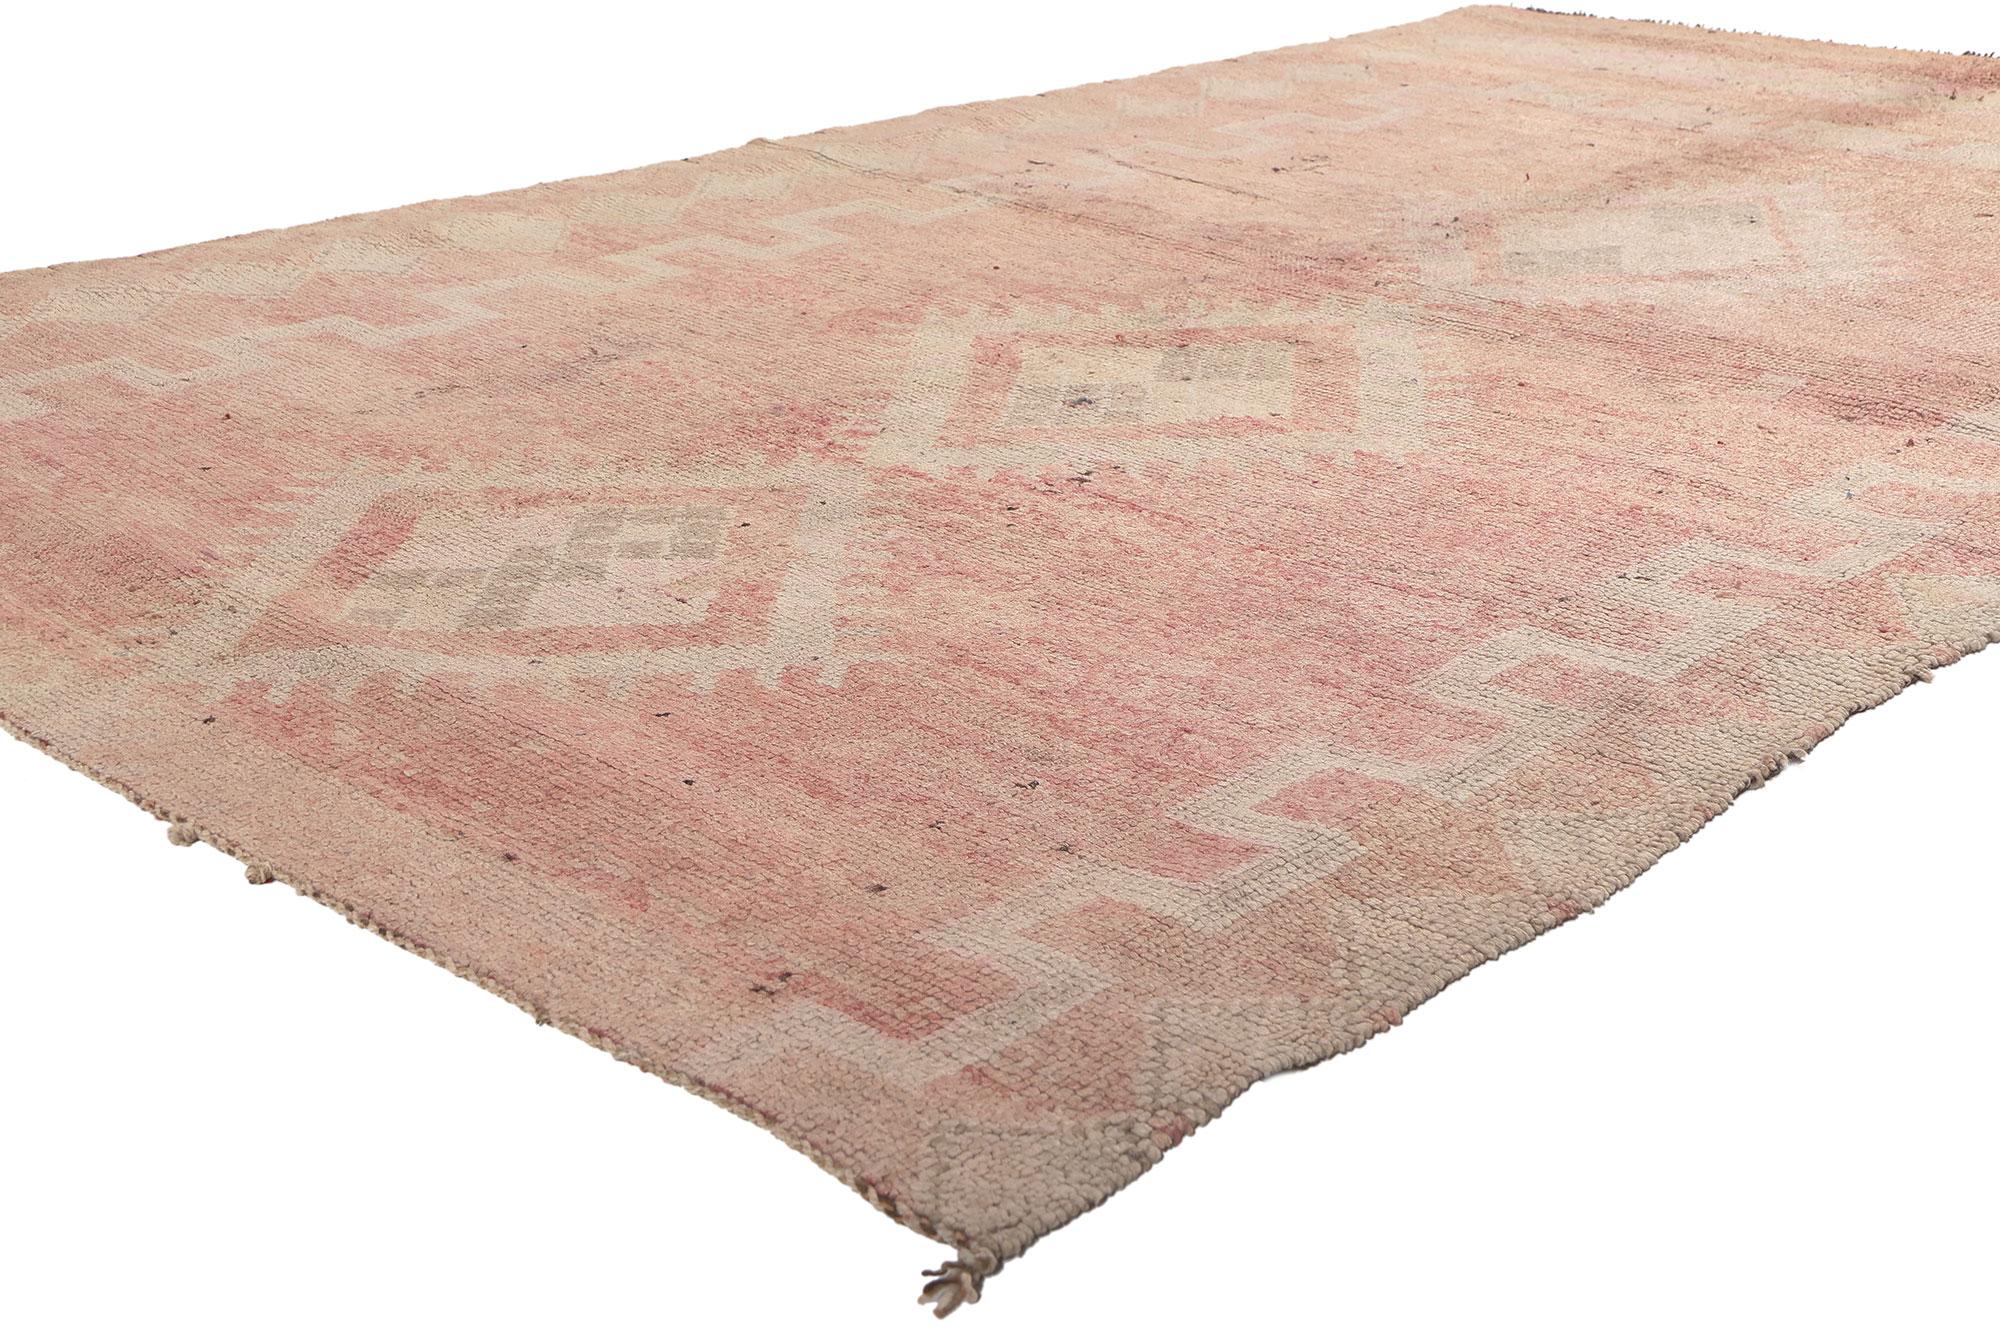 20954 Vintage Pink Boujad Moroccan Rug, 05'02 x 09'00. Celebrate the vibrant spirit of Boujad rugs, originating from the lively city of Boujad in the Khouribga region. These Moroccan rugs are cherished for their eccentric and artistic designs.